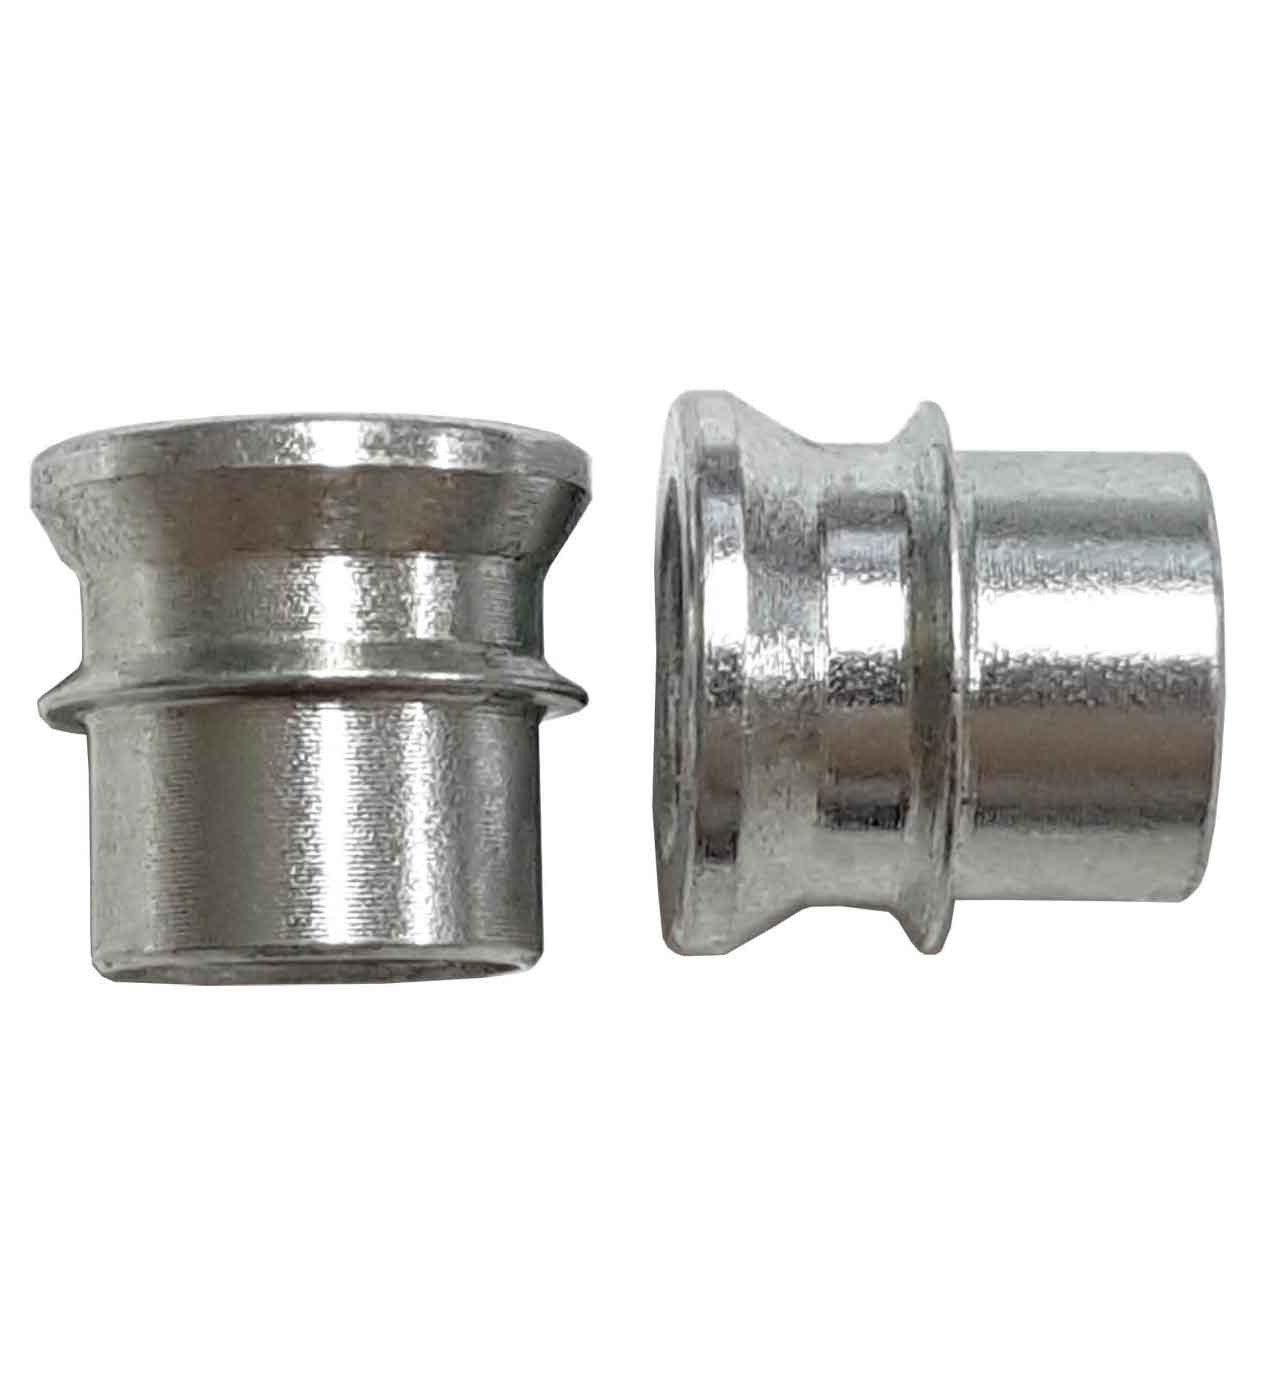 M12 to M10 Rod End Misalignment Reducers